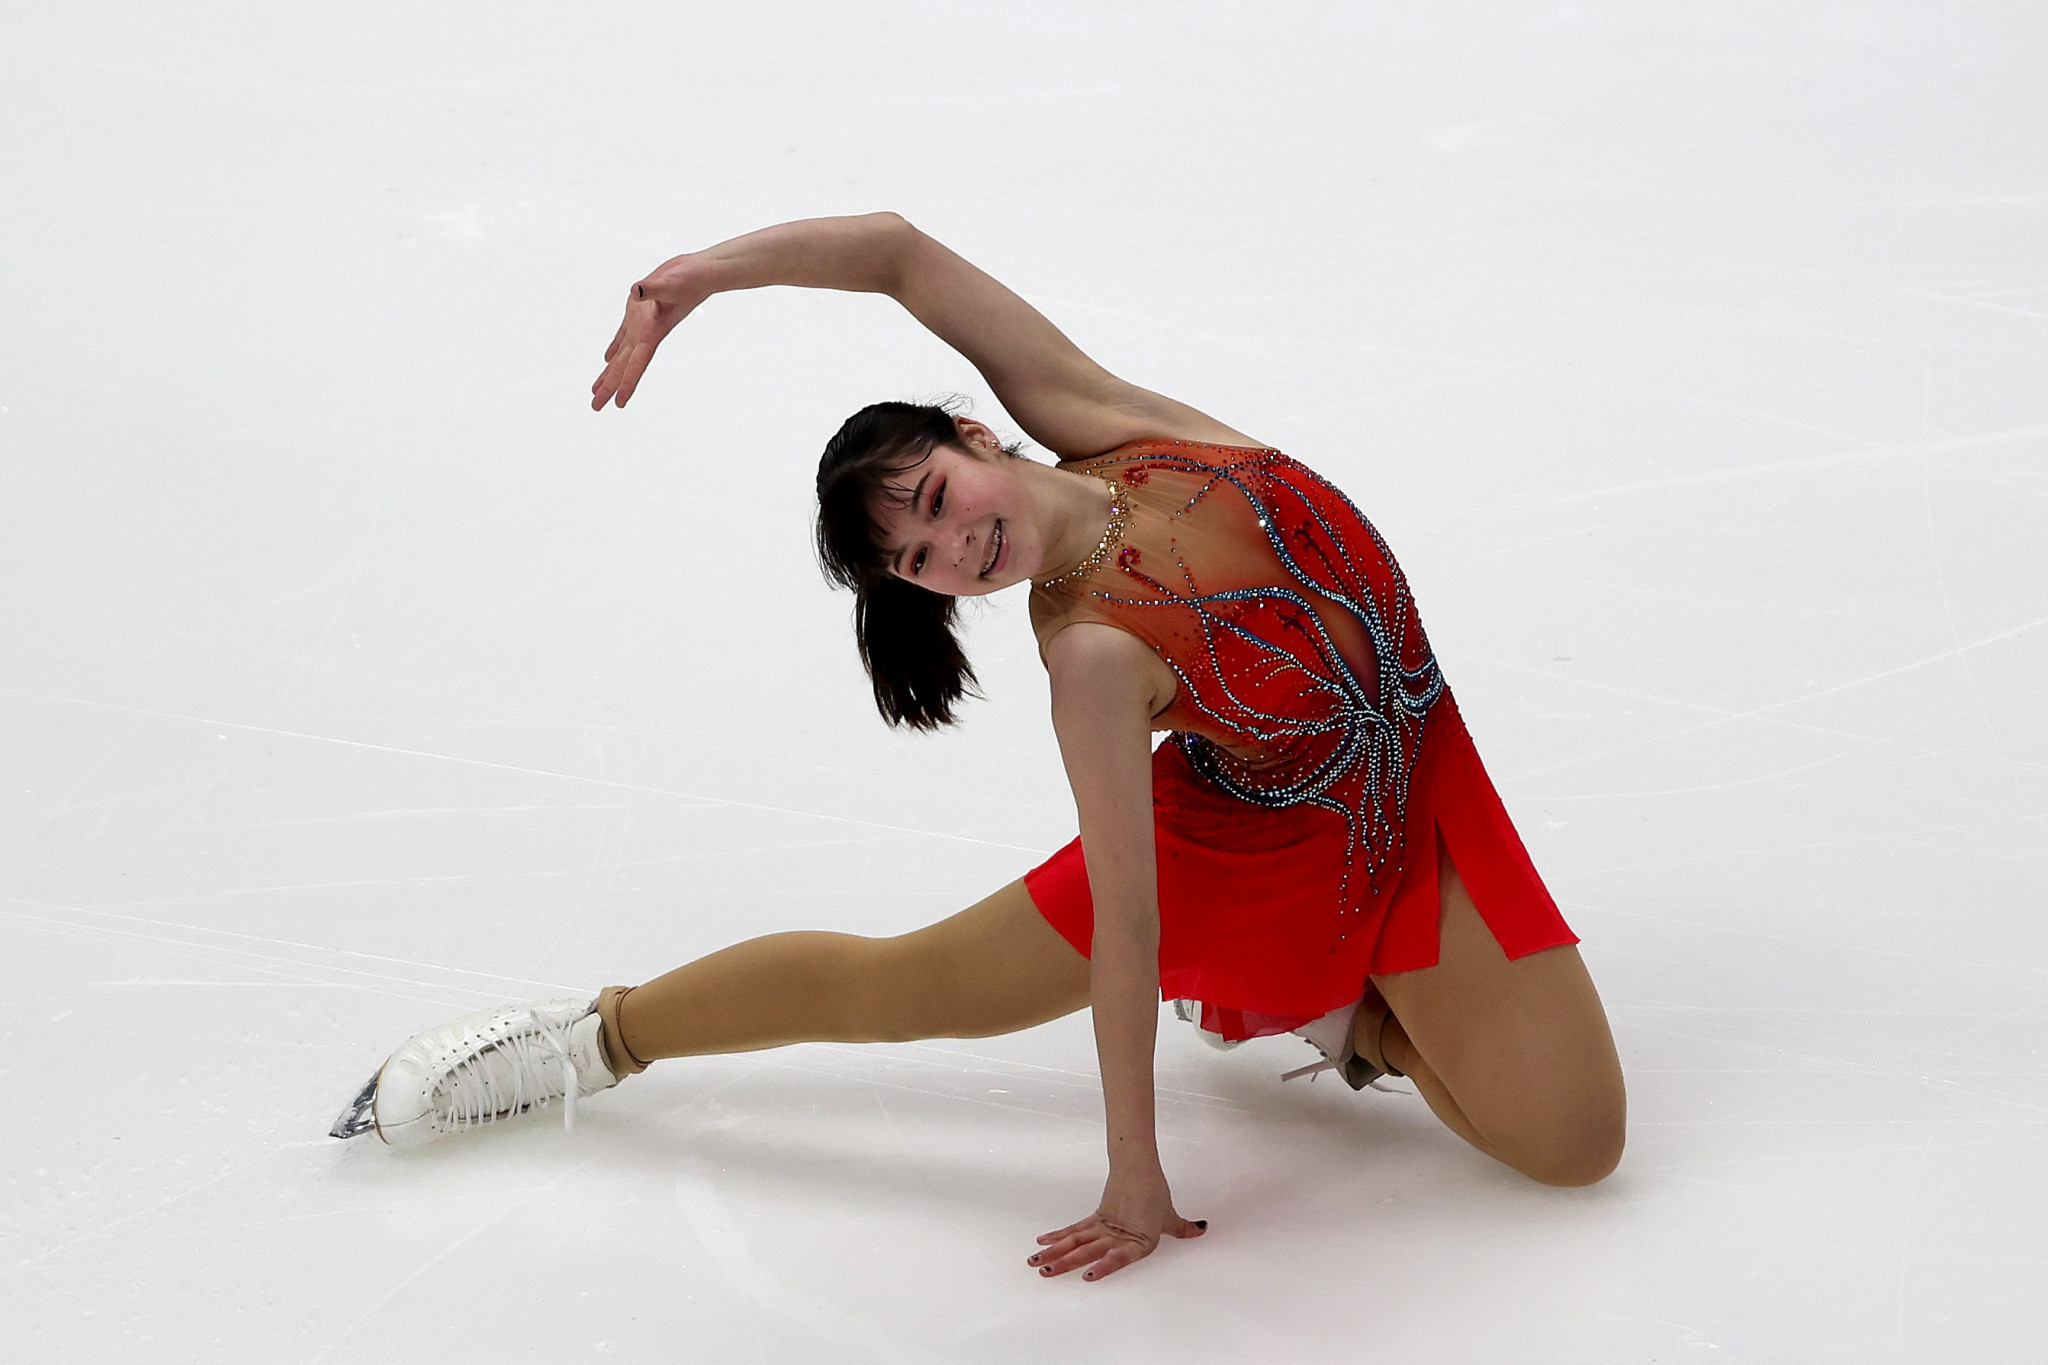 Alysa Liu finished third in the short programme before testing positive for COVID-19 at the US Figure Skating National Championships in Nashville ©Getty Images